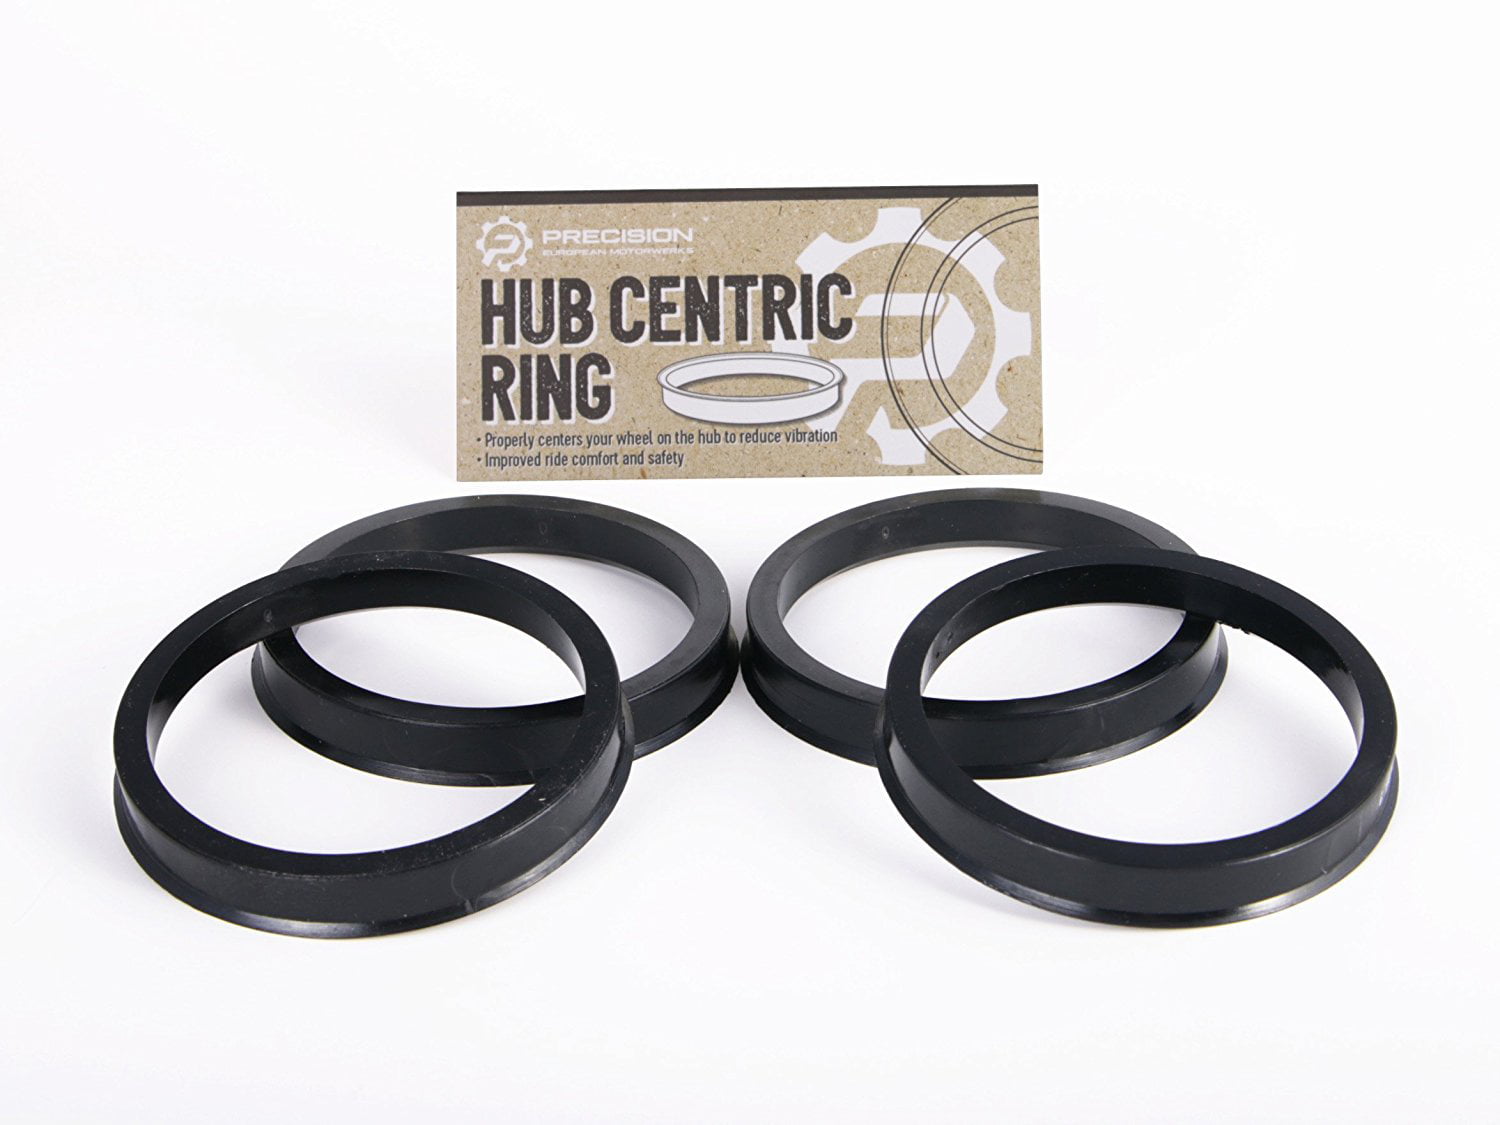 73.1-56.1 Pack of 4 Black Poly Carbon Plastic HUBRINGS XPD OFF ROAD ZELIDON Wheel Accessories HUBCENTRIC Rings 